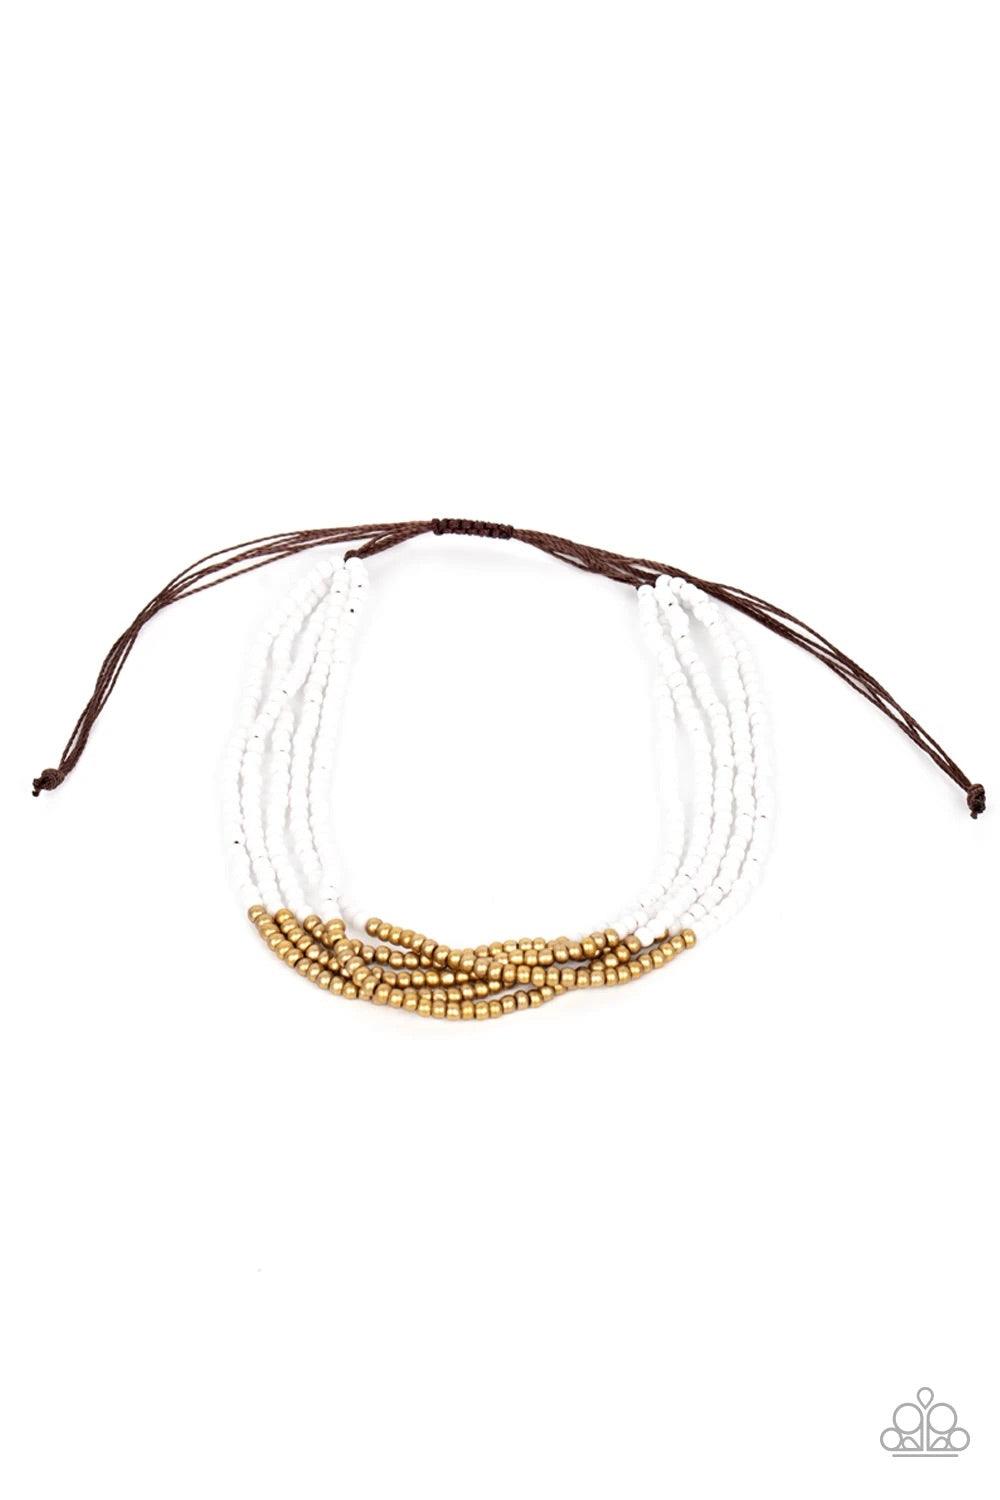 Paparazzi Accessories BEAD Bold - White Four strands of white seed beads accented with a bold section of brass seed beads wraps around the wrist for a simple yet trendy look. Features an adjustable sliding knot closure. Sold as one individual bracelet. Je